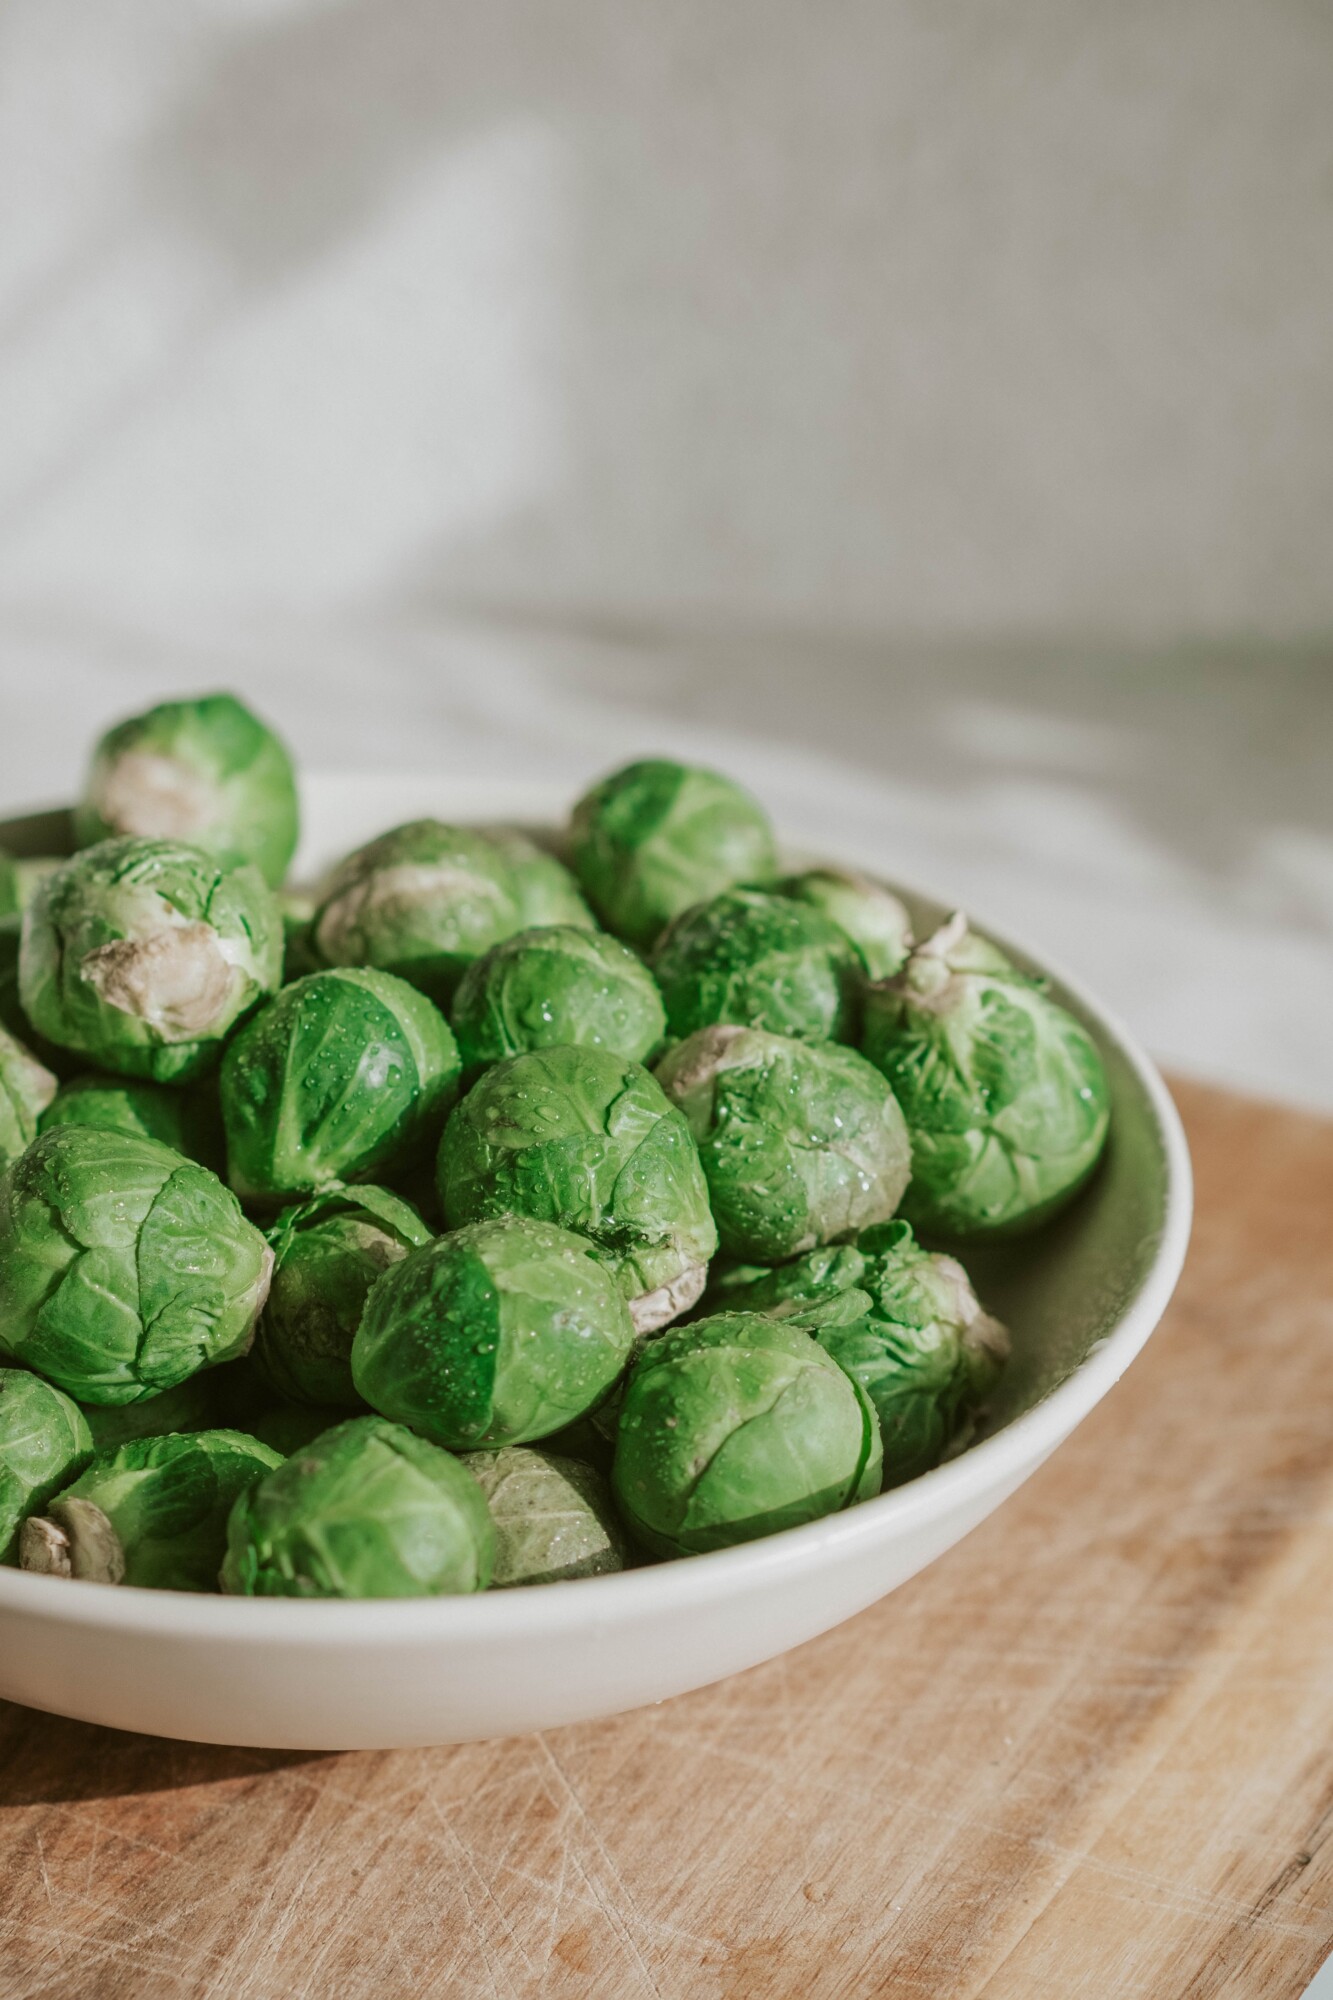 Looking for a quick and delicious veggie side dish that will have your taste buds dancing with delight? Look no further than this irresistible caramelized Brussels sprouts recipe with brown sugar and bacon.